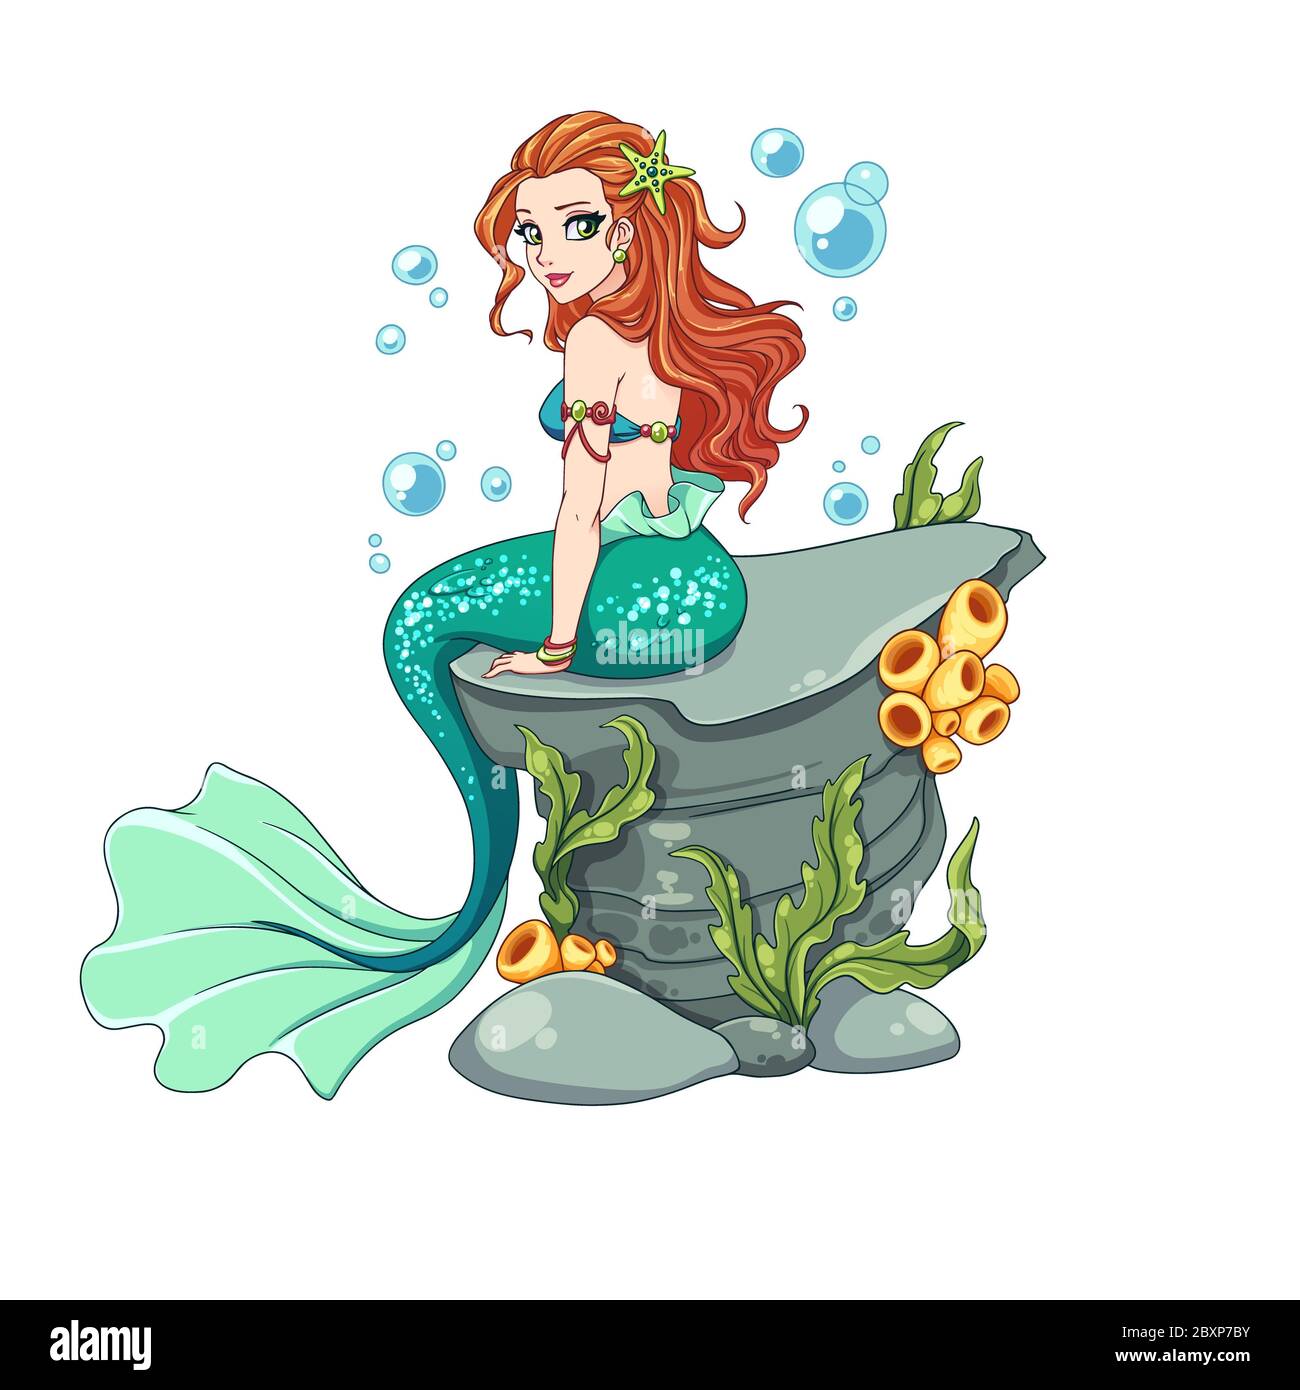 Beautiful cartoon mermaid with curly red hair and green fish tail